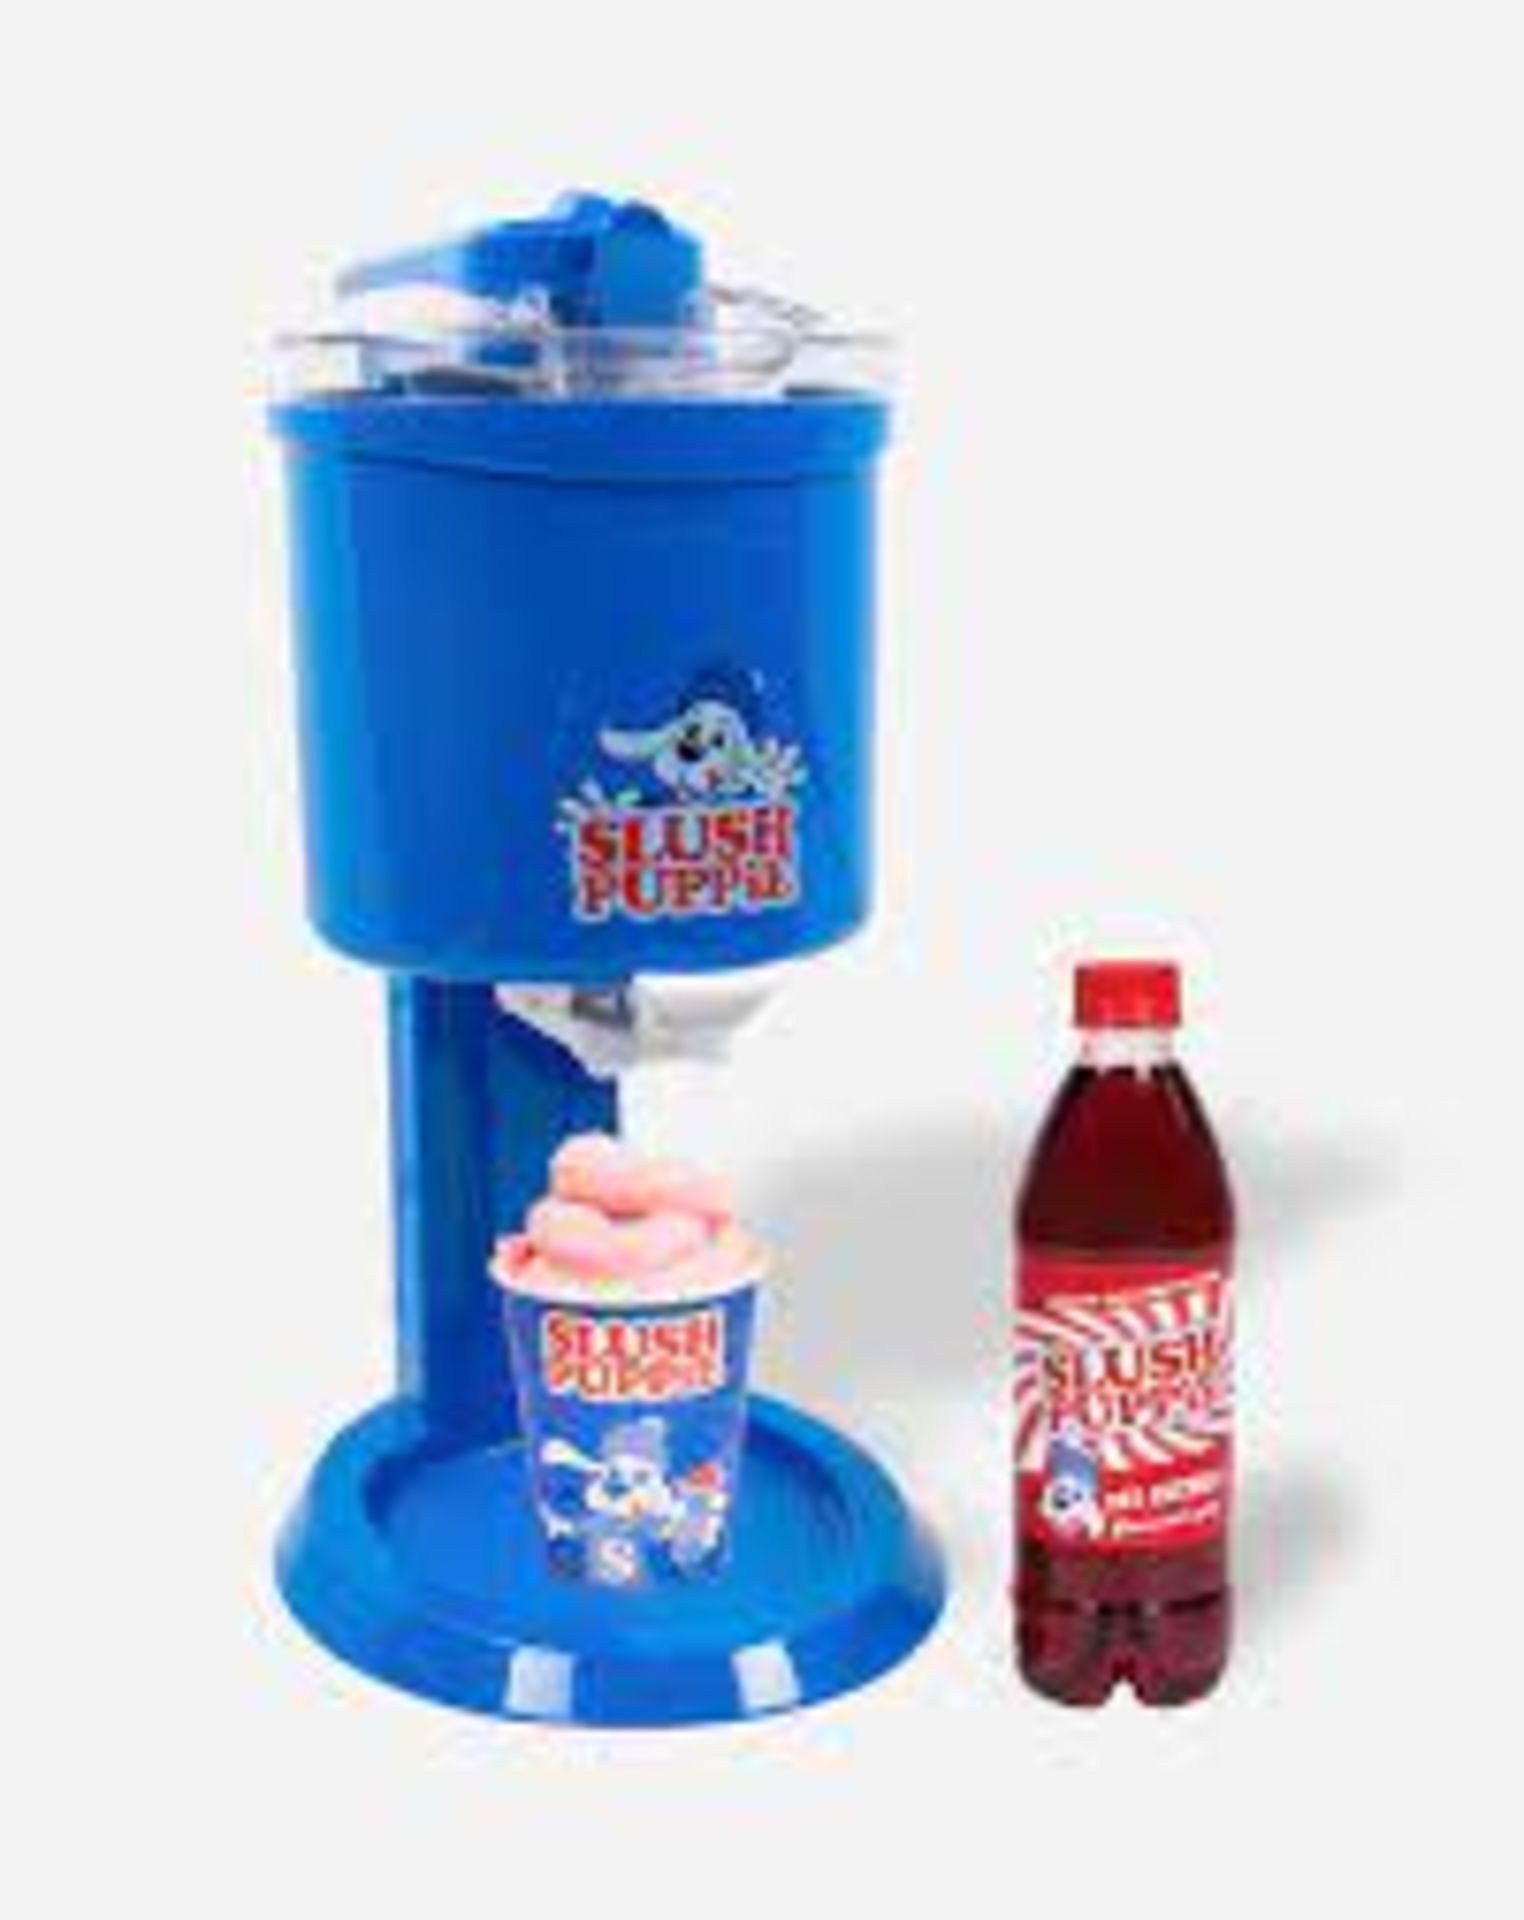 2 X NEW BOXED SLUSH PUPPIE ICE CREAM PARTY PACK. ICE CREAM MAKER AND RED CHERRIE SYRUP. (ROW15RACK)